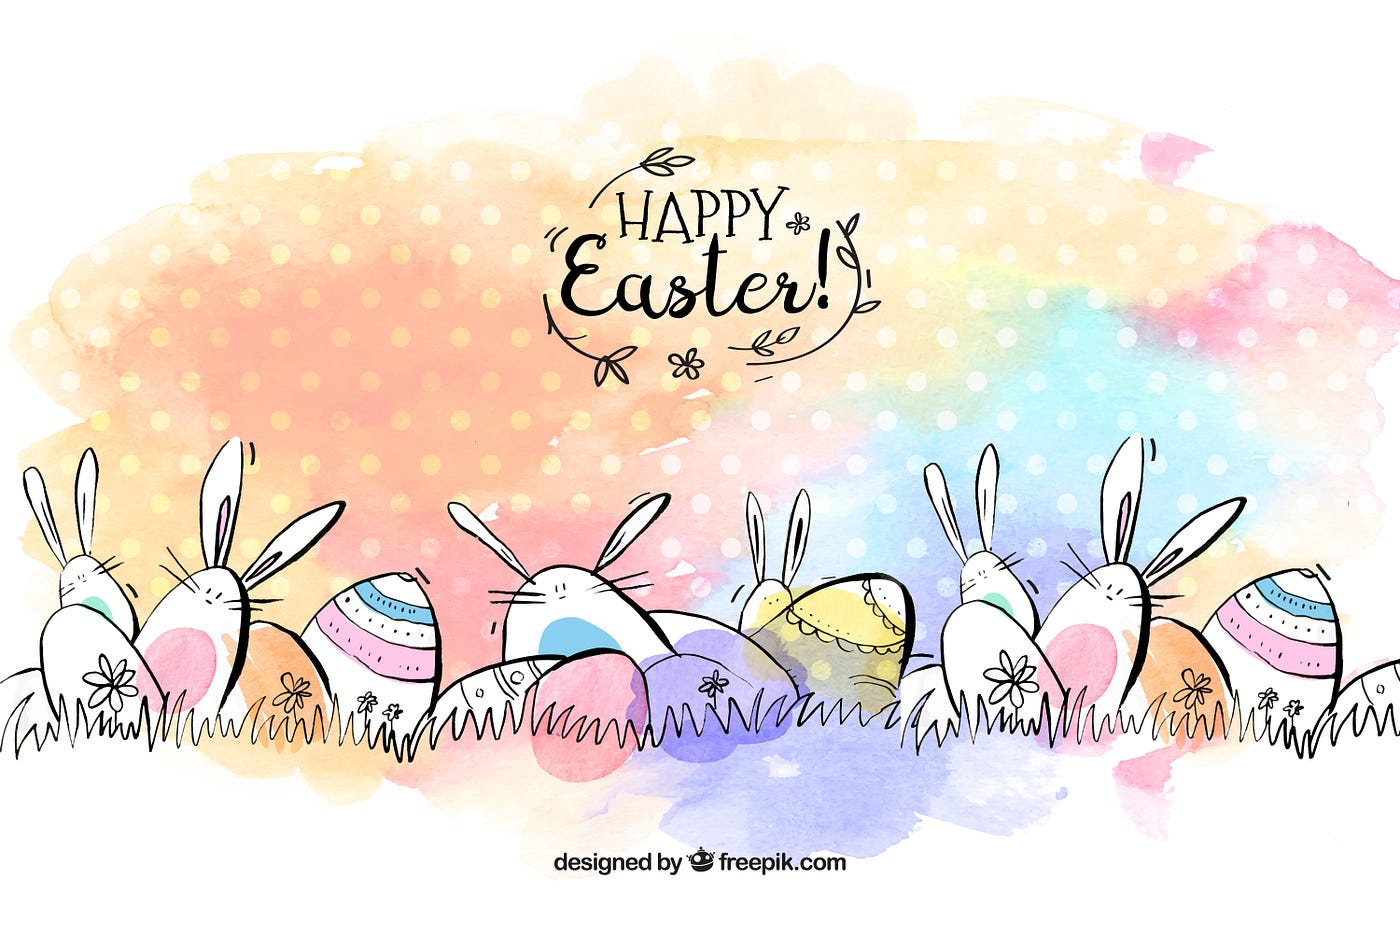 30 Amazing Easter Cards For Friends And Family | by Vectr | Vectr | Medium